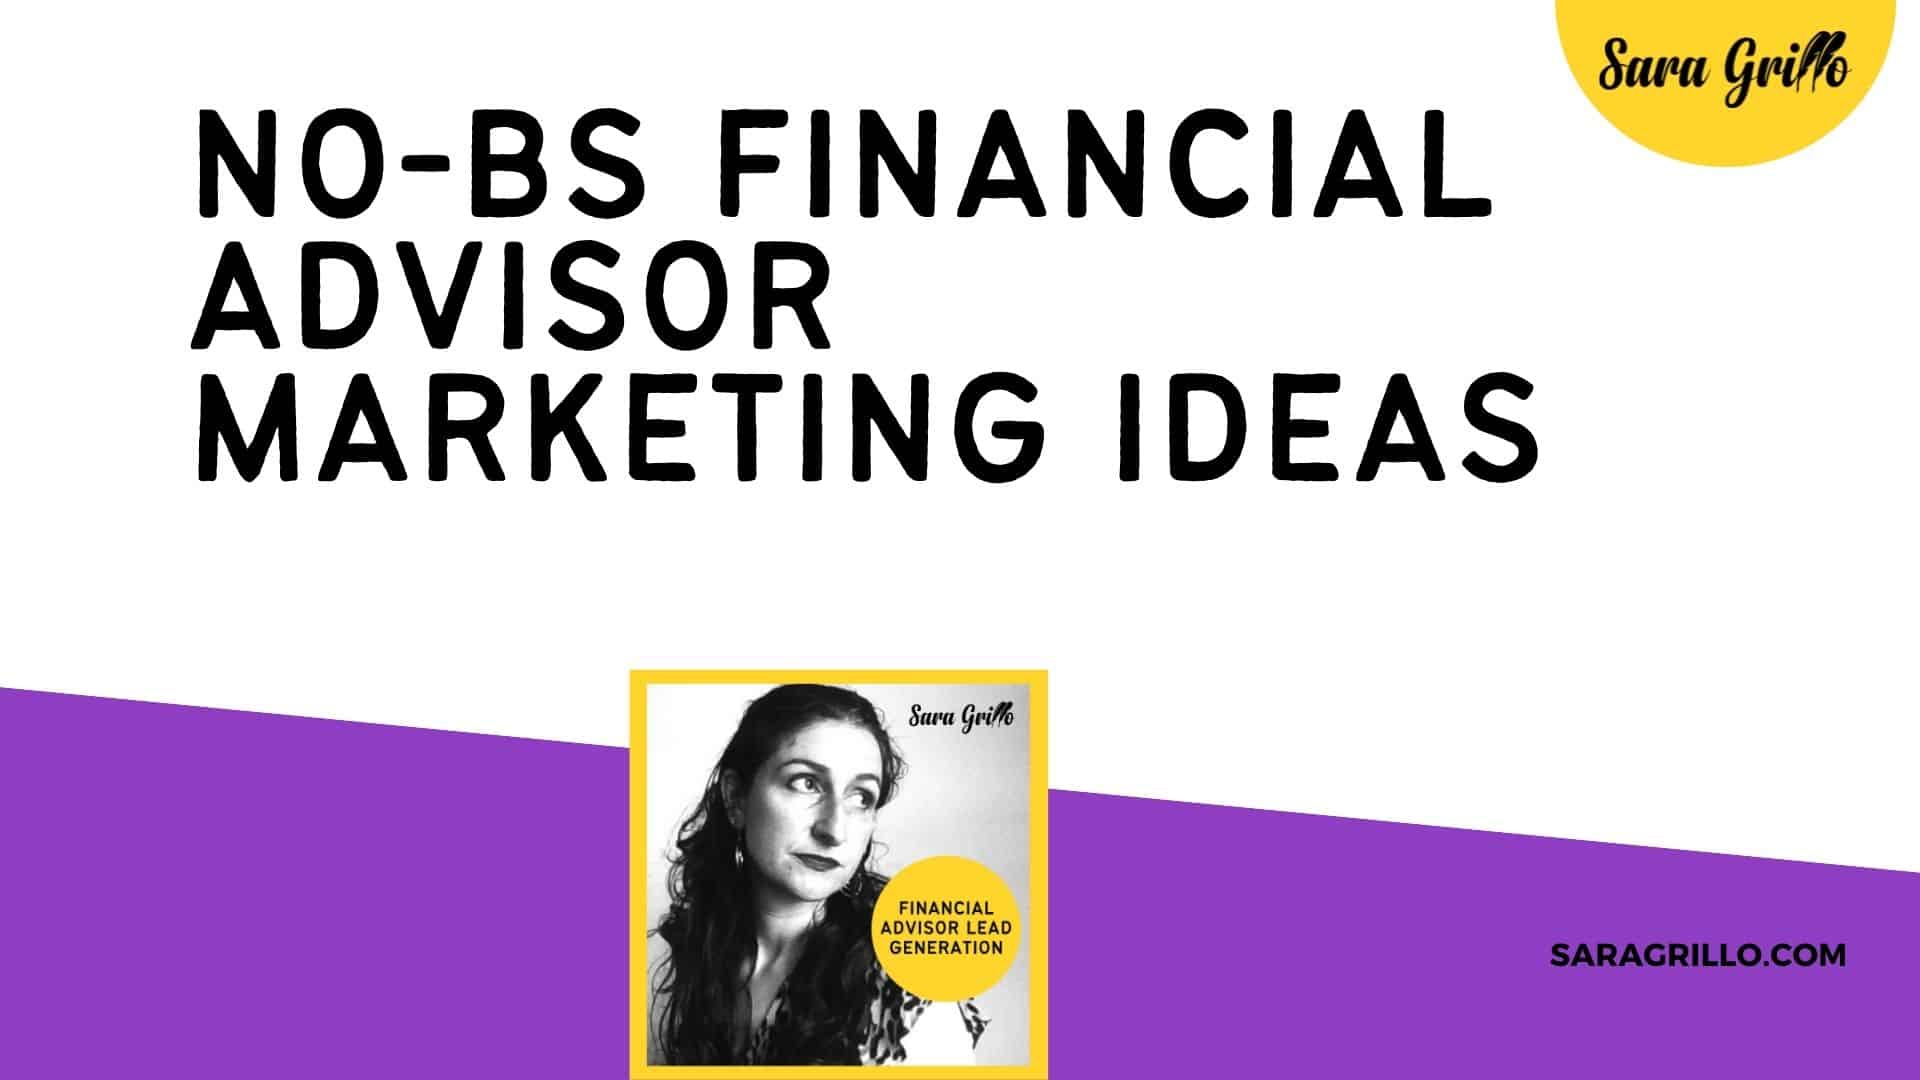 Here are 5 financial advisor marketing ideas that will allow you to kick the competition's butt!